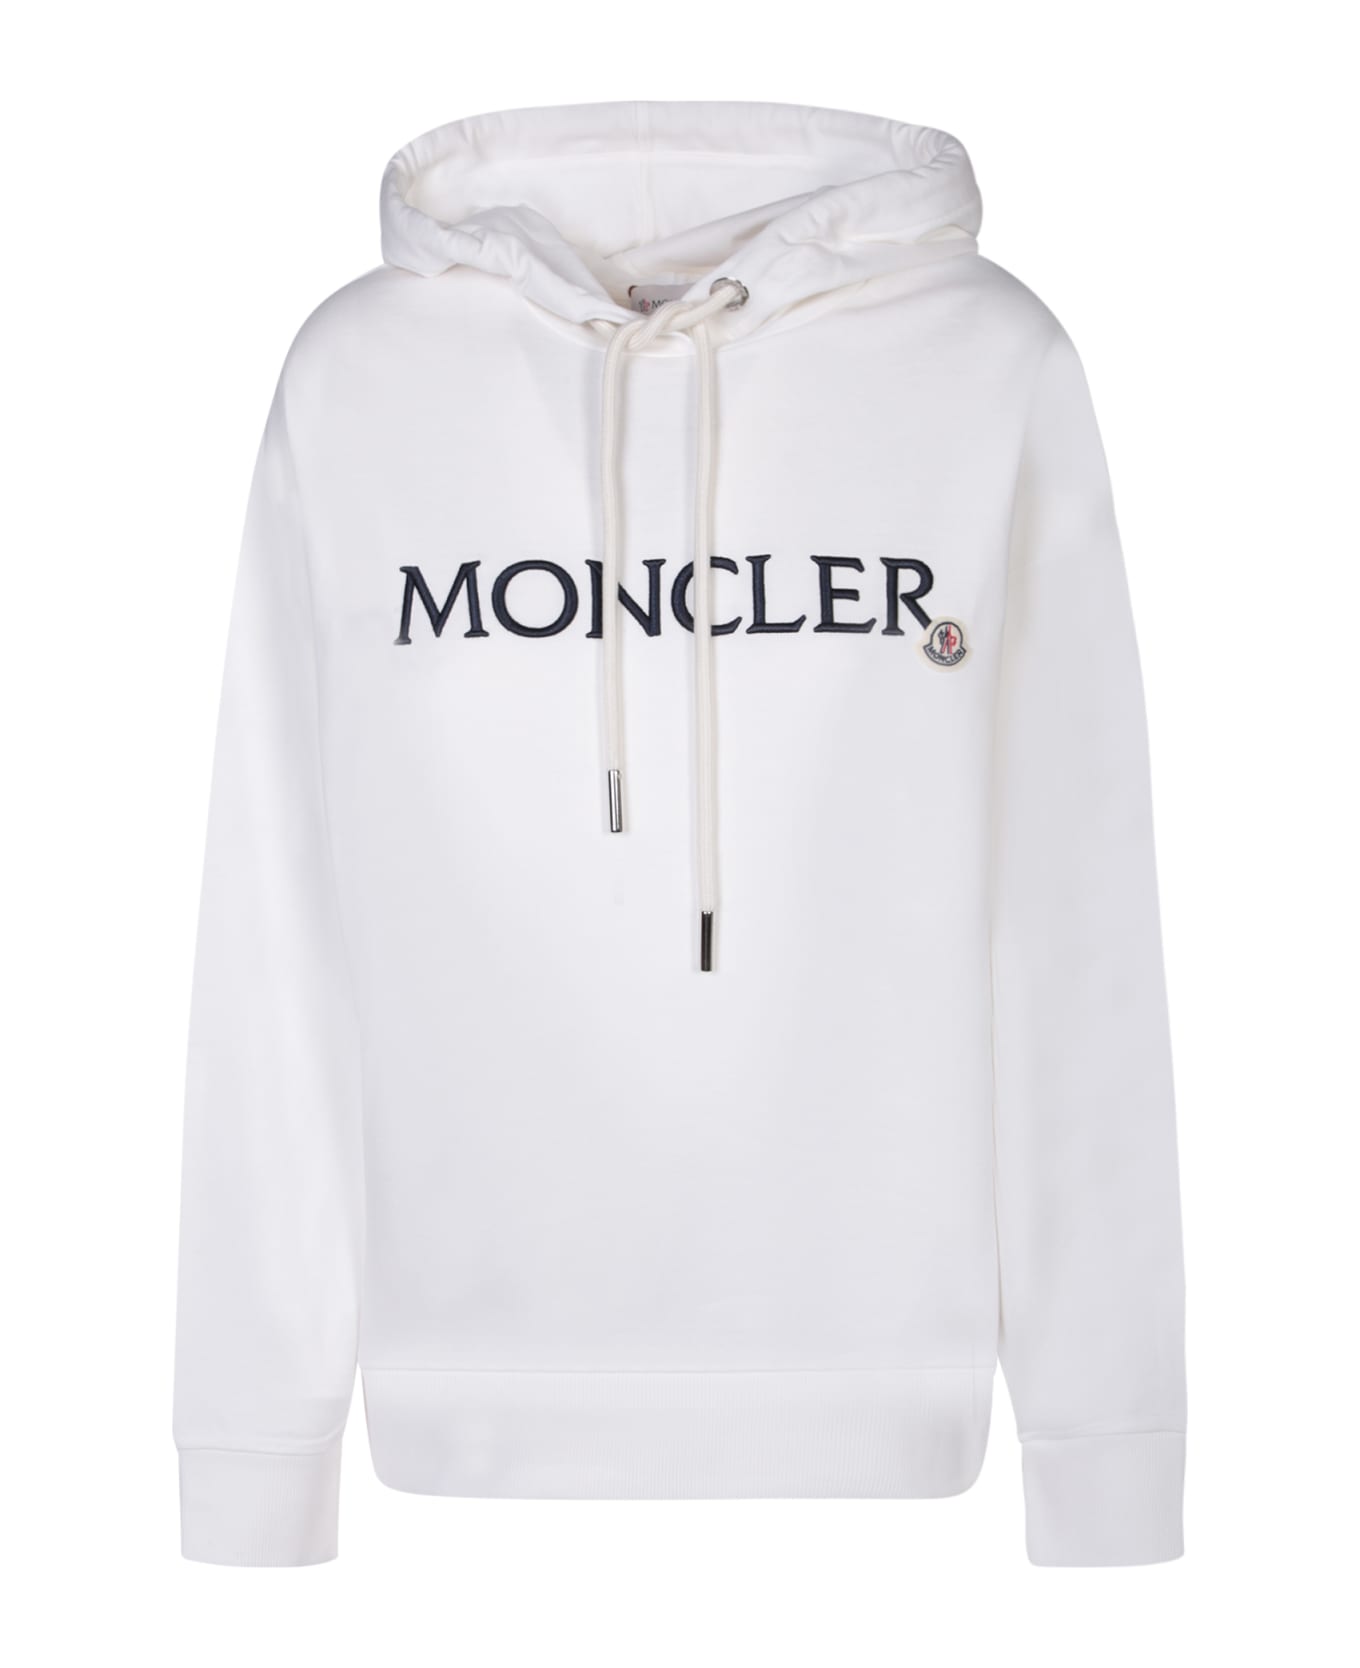 Moncler White Hoodie With Embroidered Lettering Logo - 037 フリース